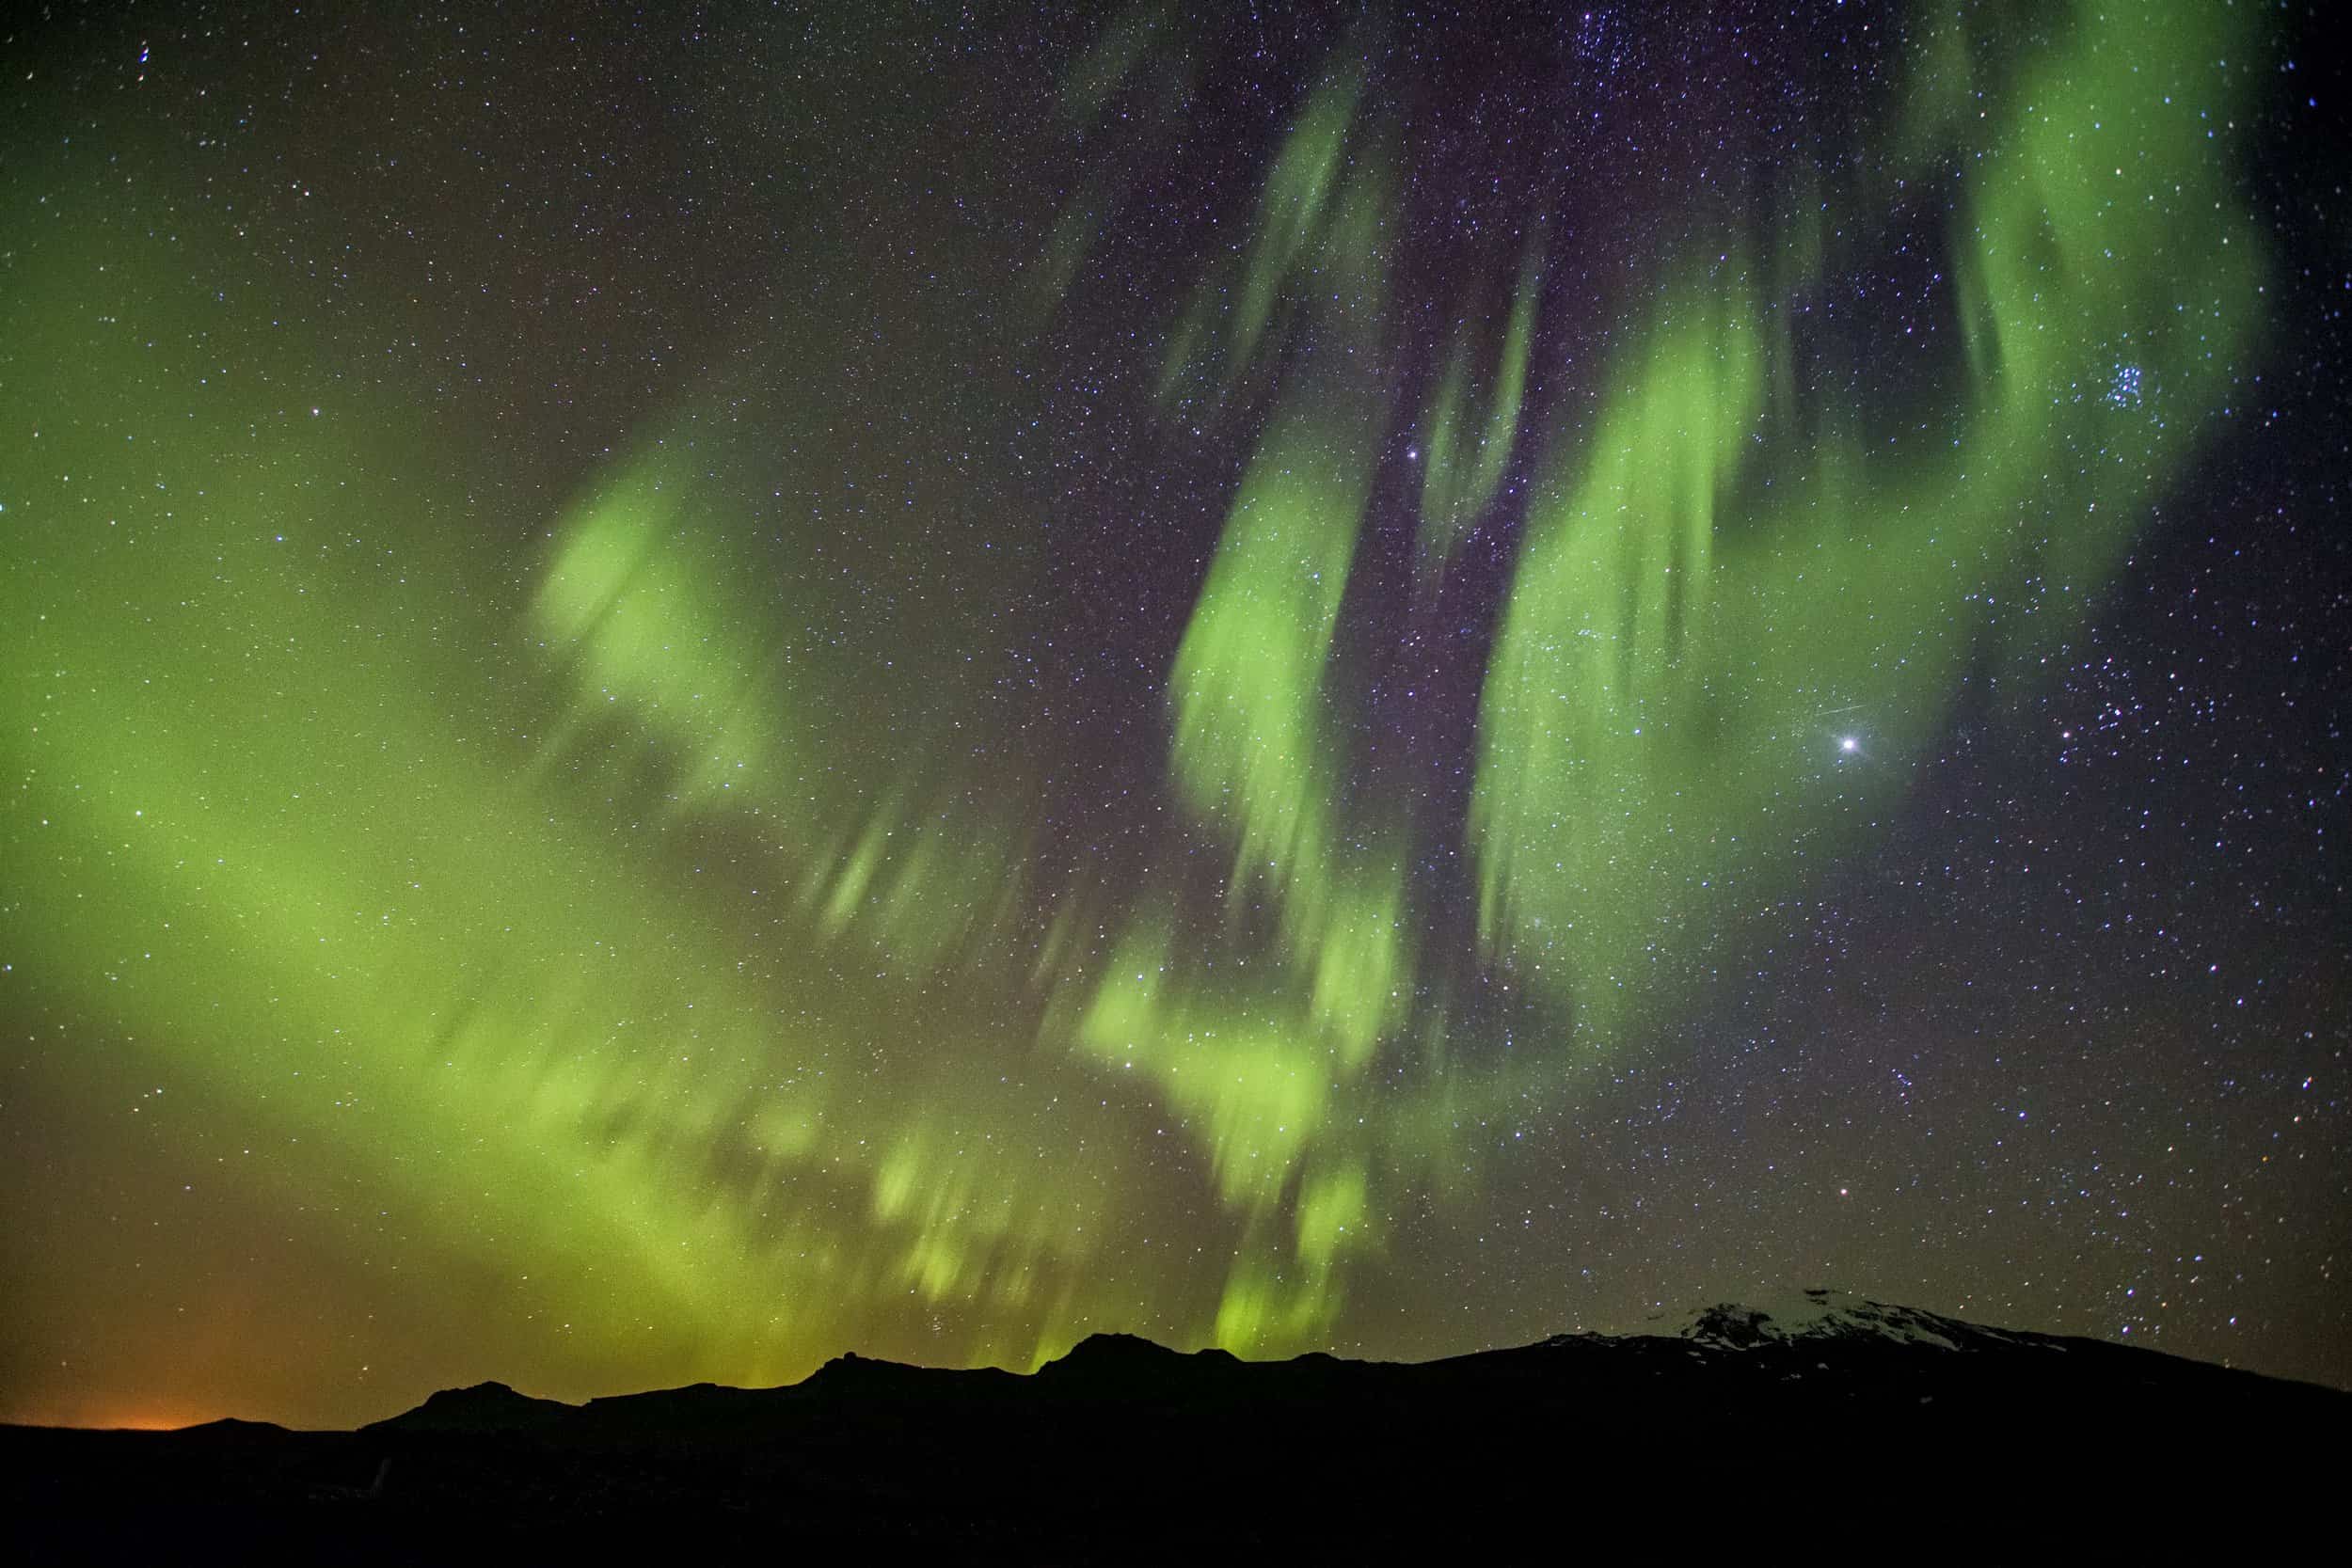 Photo of the northern lights with mountains in silhouette.